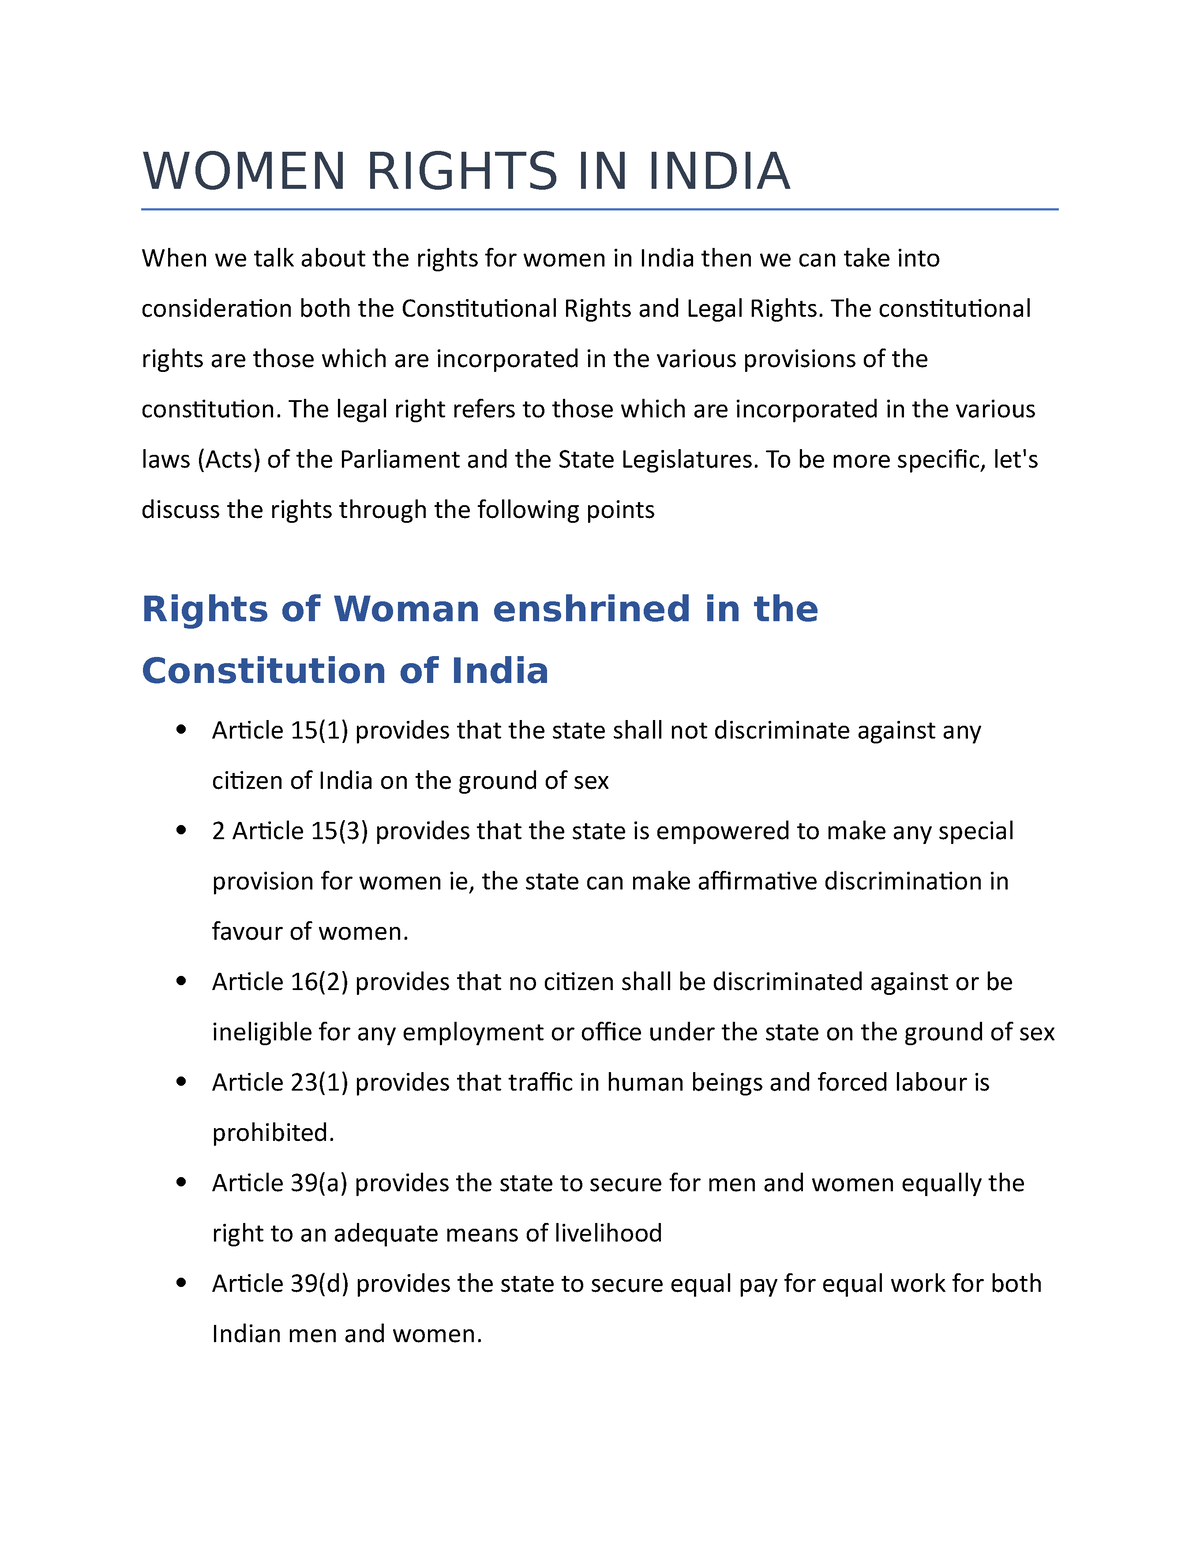 dissertation on women's rights in india